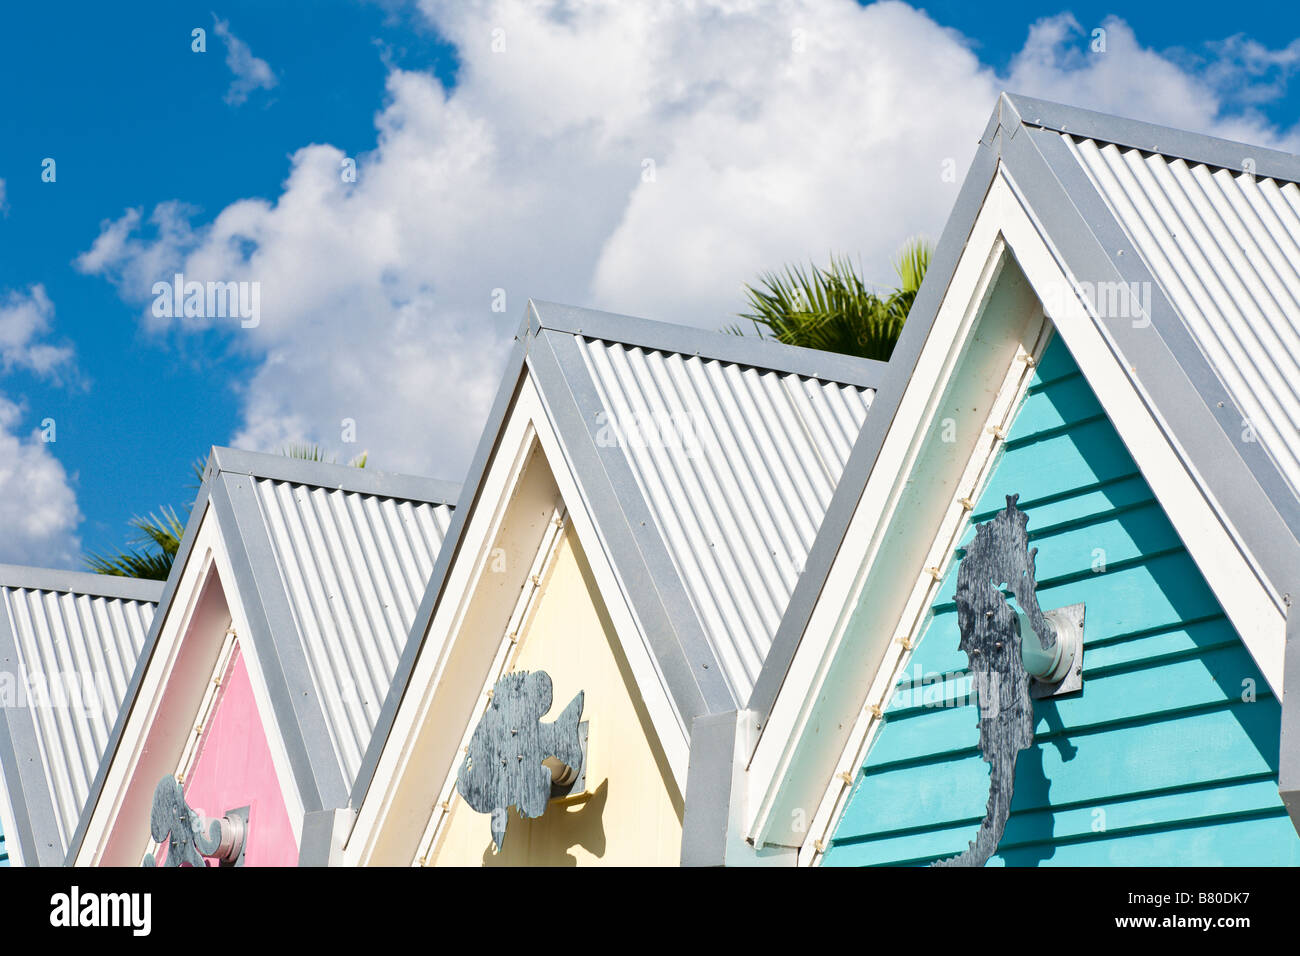 Pastel gables decorated with nautical symbols against deep blue sky with white clouds Stock Photo